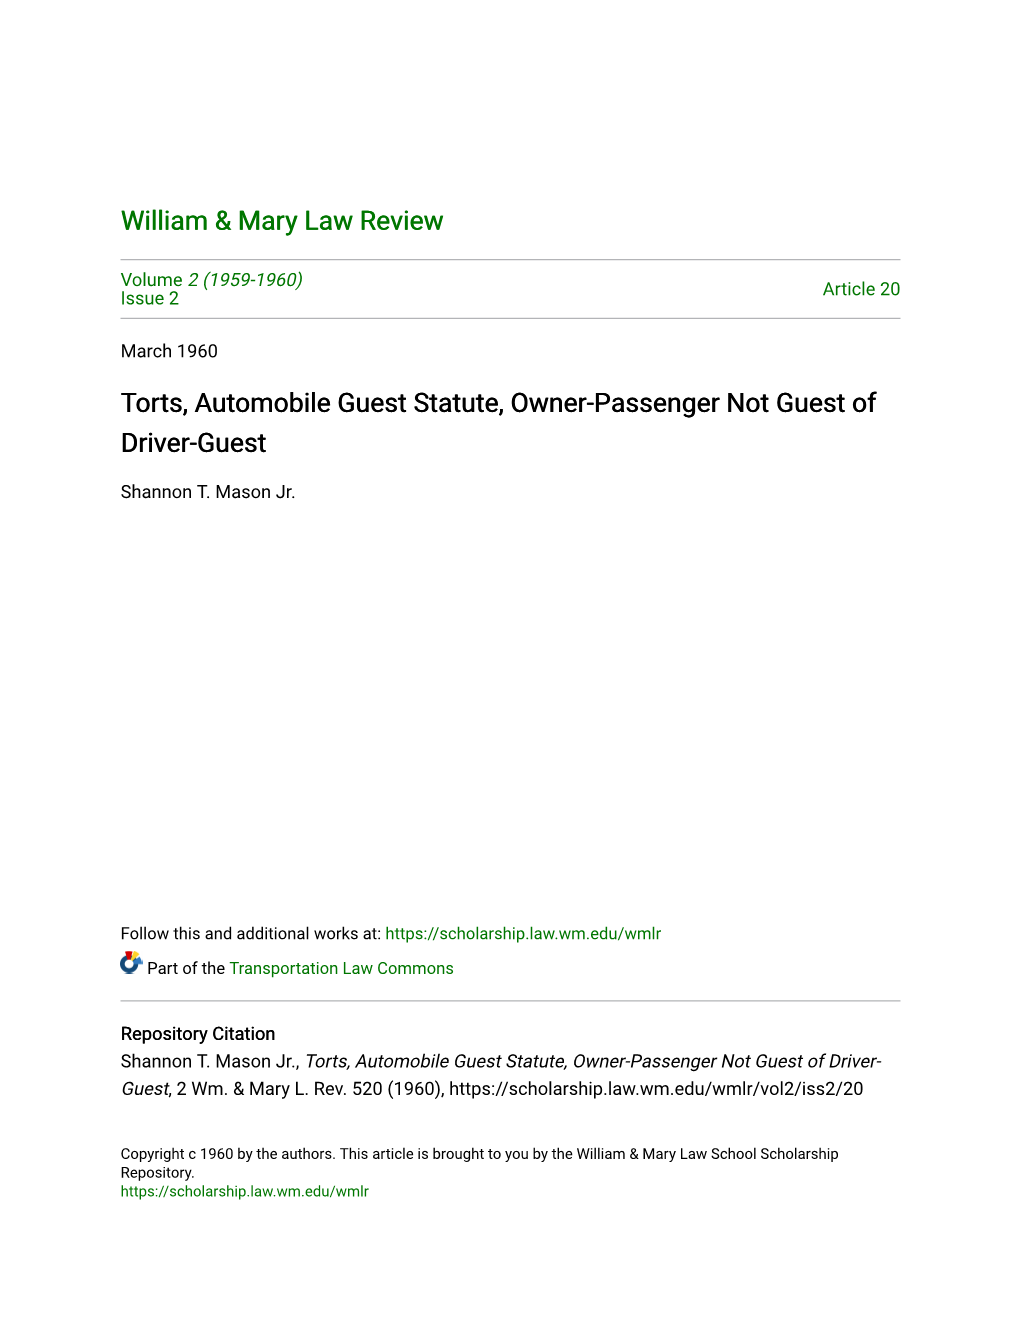 Torts, Automobile Guest Statute, Owner-Passenger Not Guest of Driver-Guest